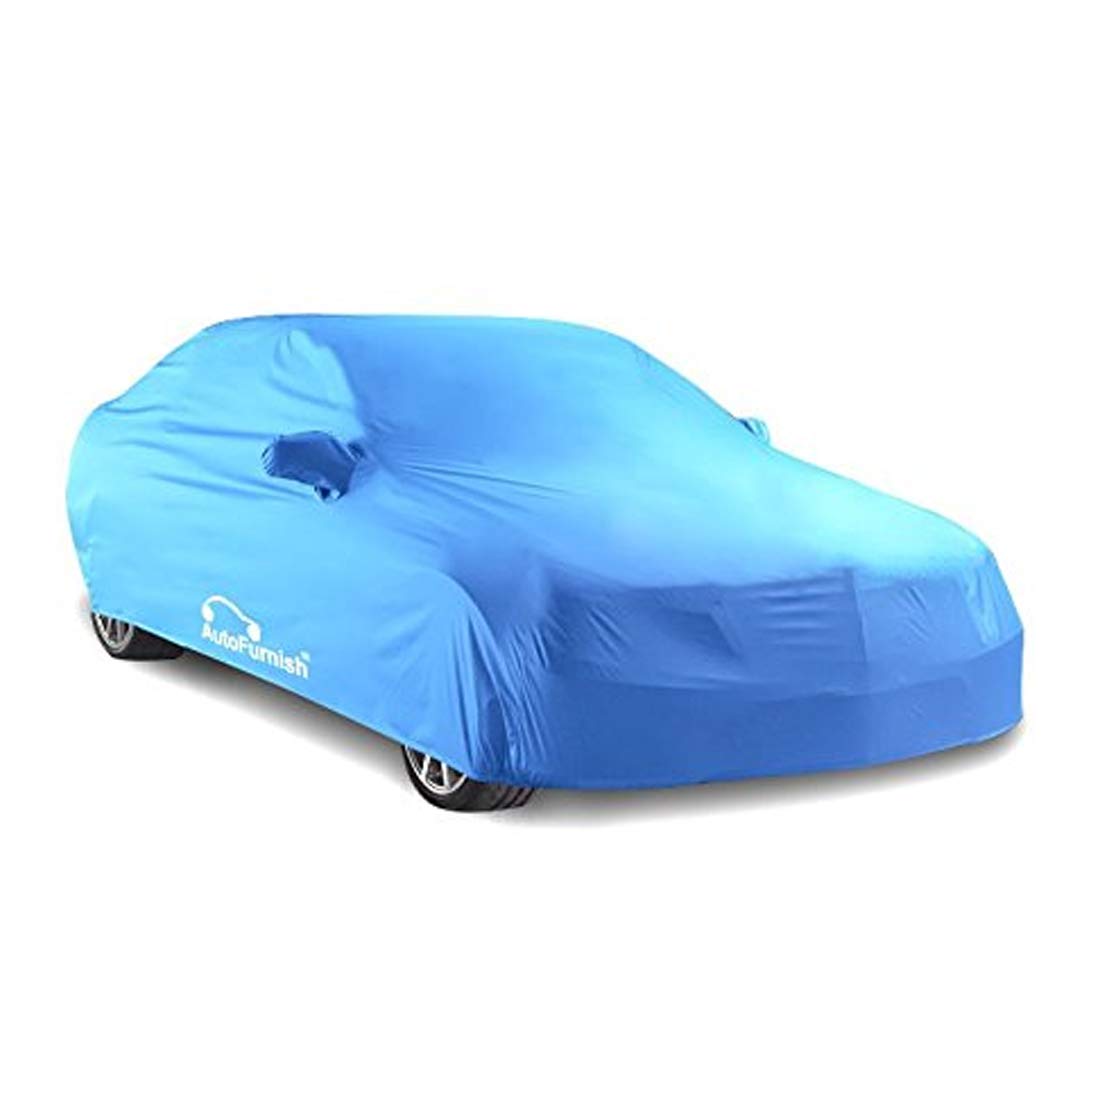 Mini Cooper Countryman Car Body Cover, Triple Stitched, Heat & Water  Resistant with Front & Rear Elastic Strap & Side Mirror Pockets (PARKER  AQUA)